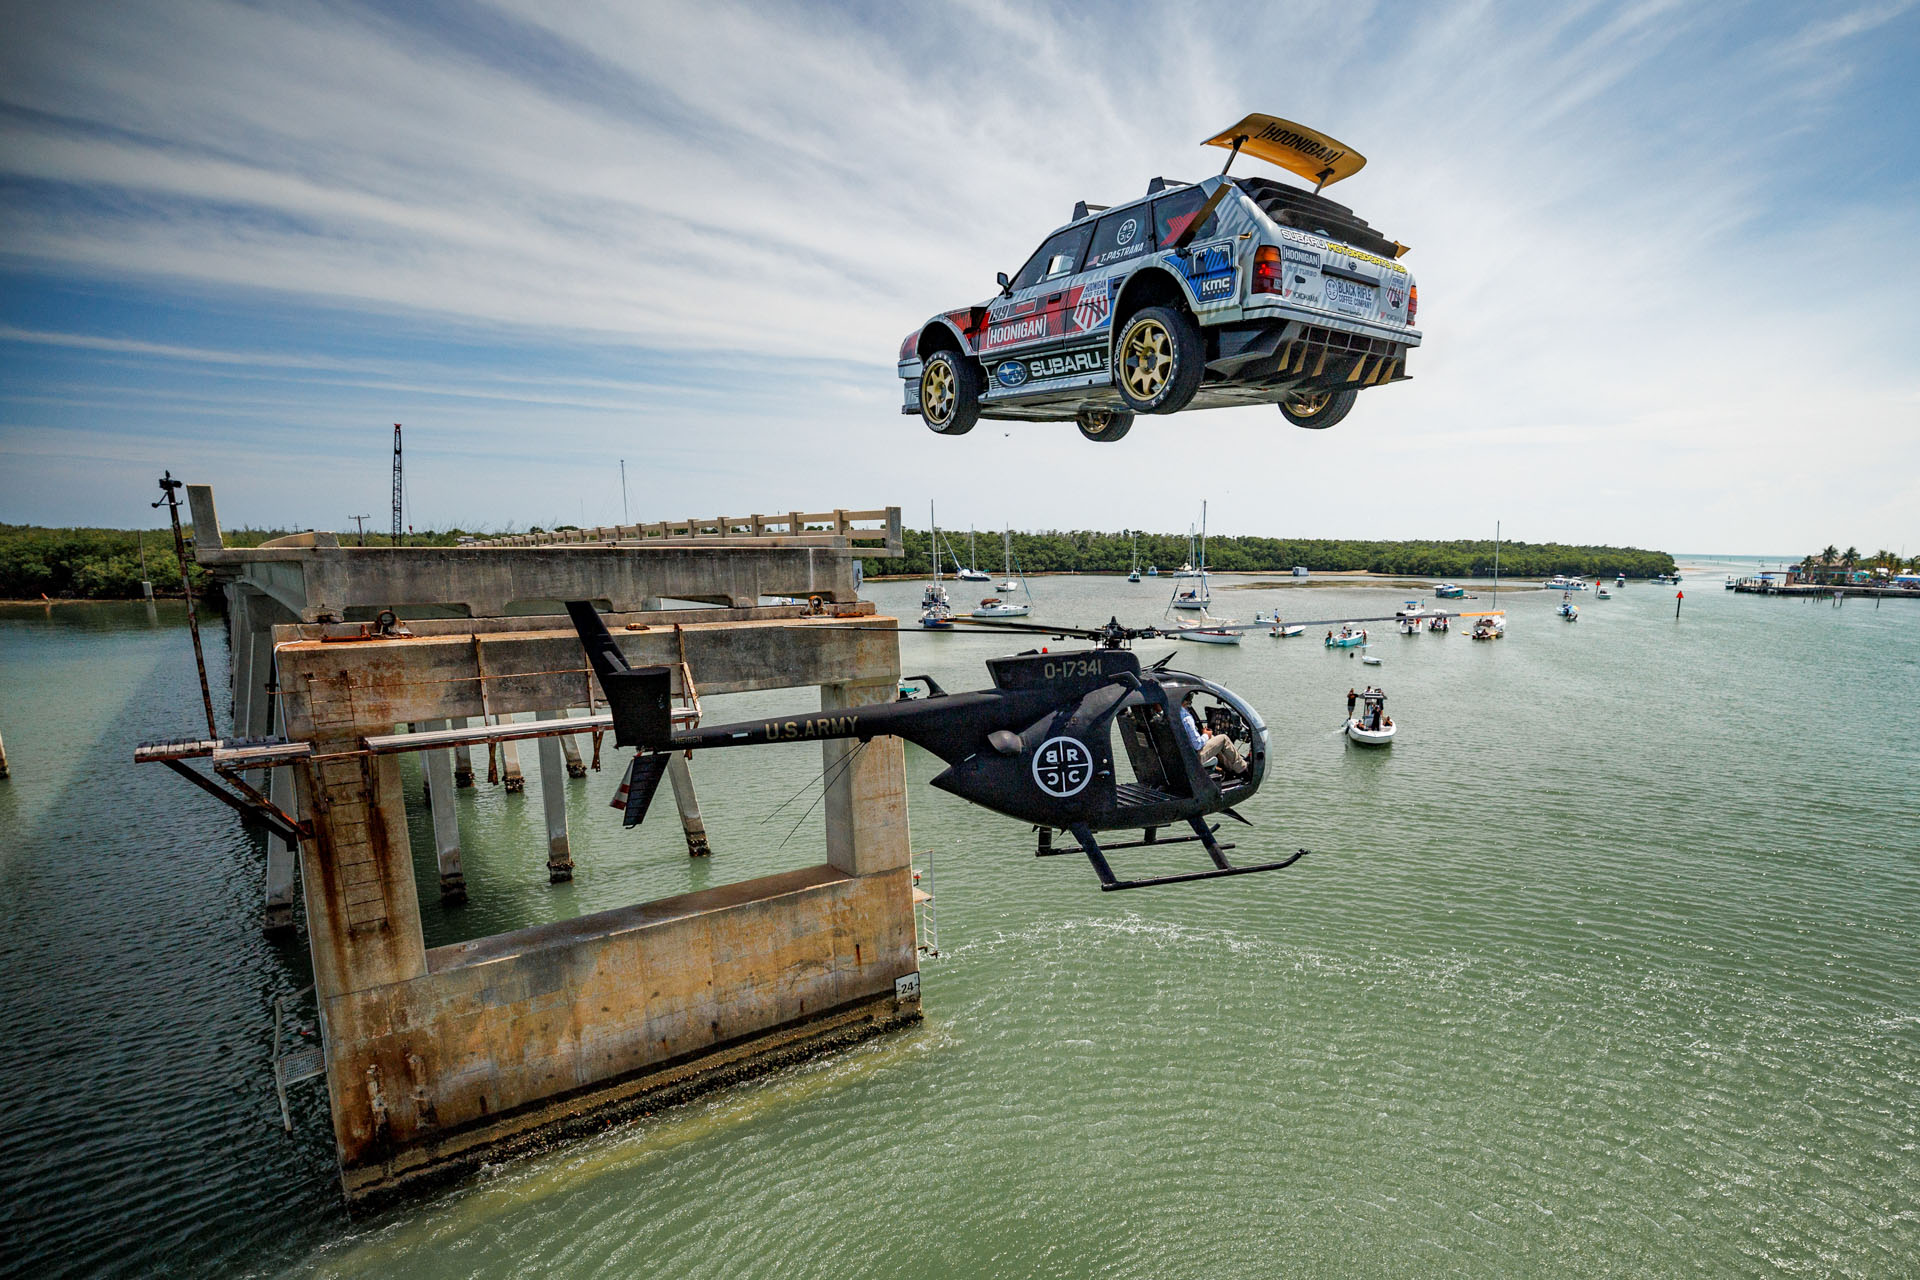 New Gymkhana Video Asks the Question: What Can’t Travis Pastrana Jump in a Subaru?